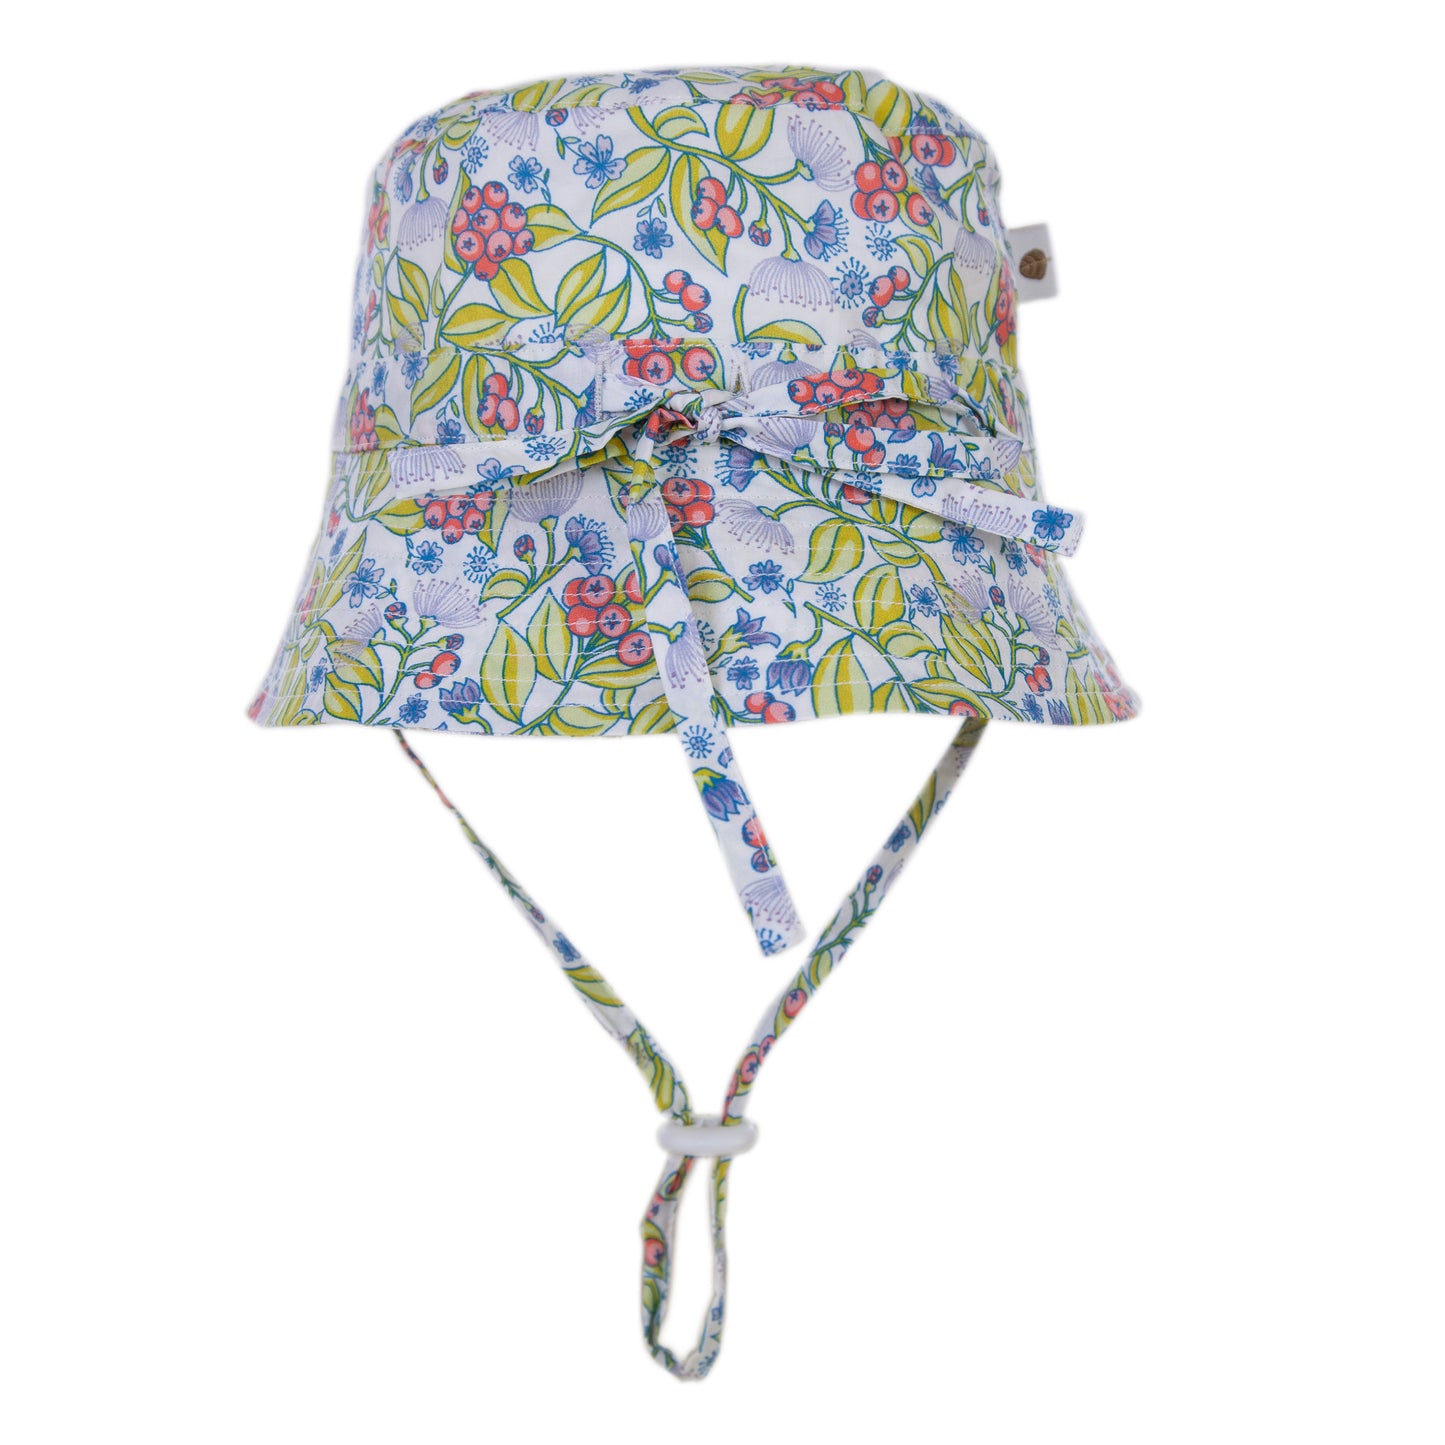 Melissa Hat Lilly Pilly